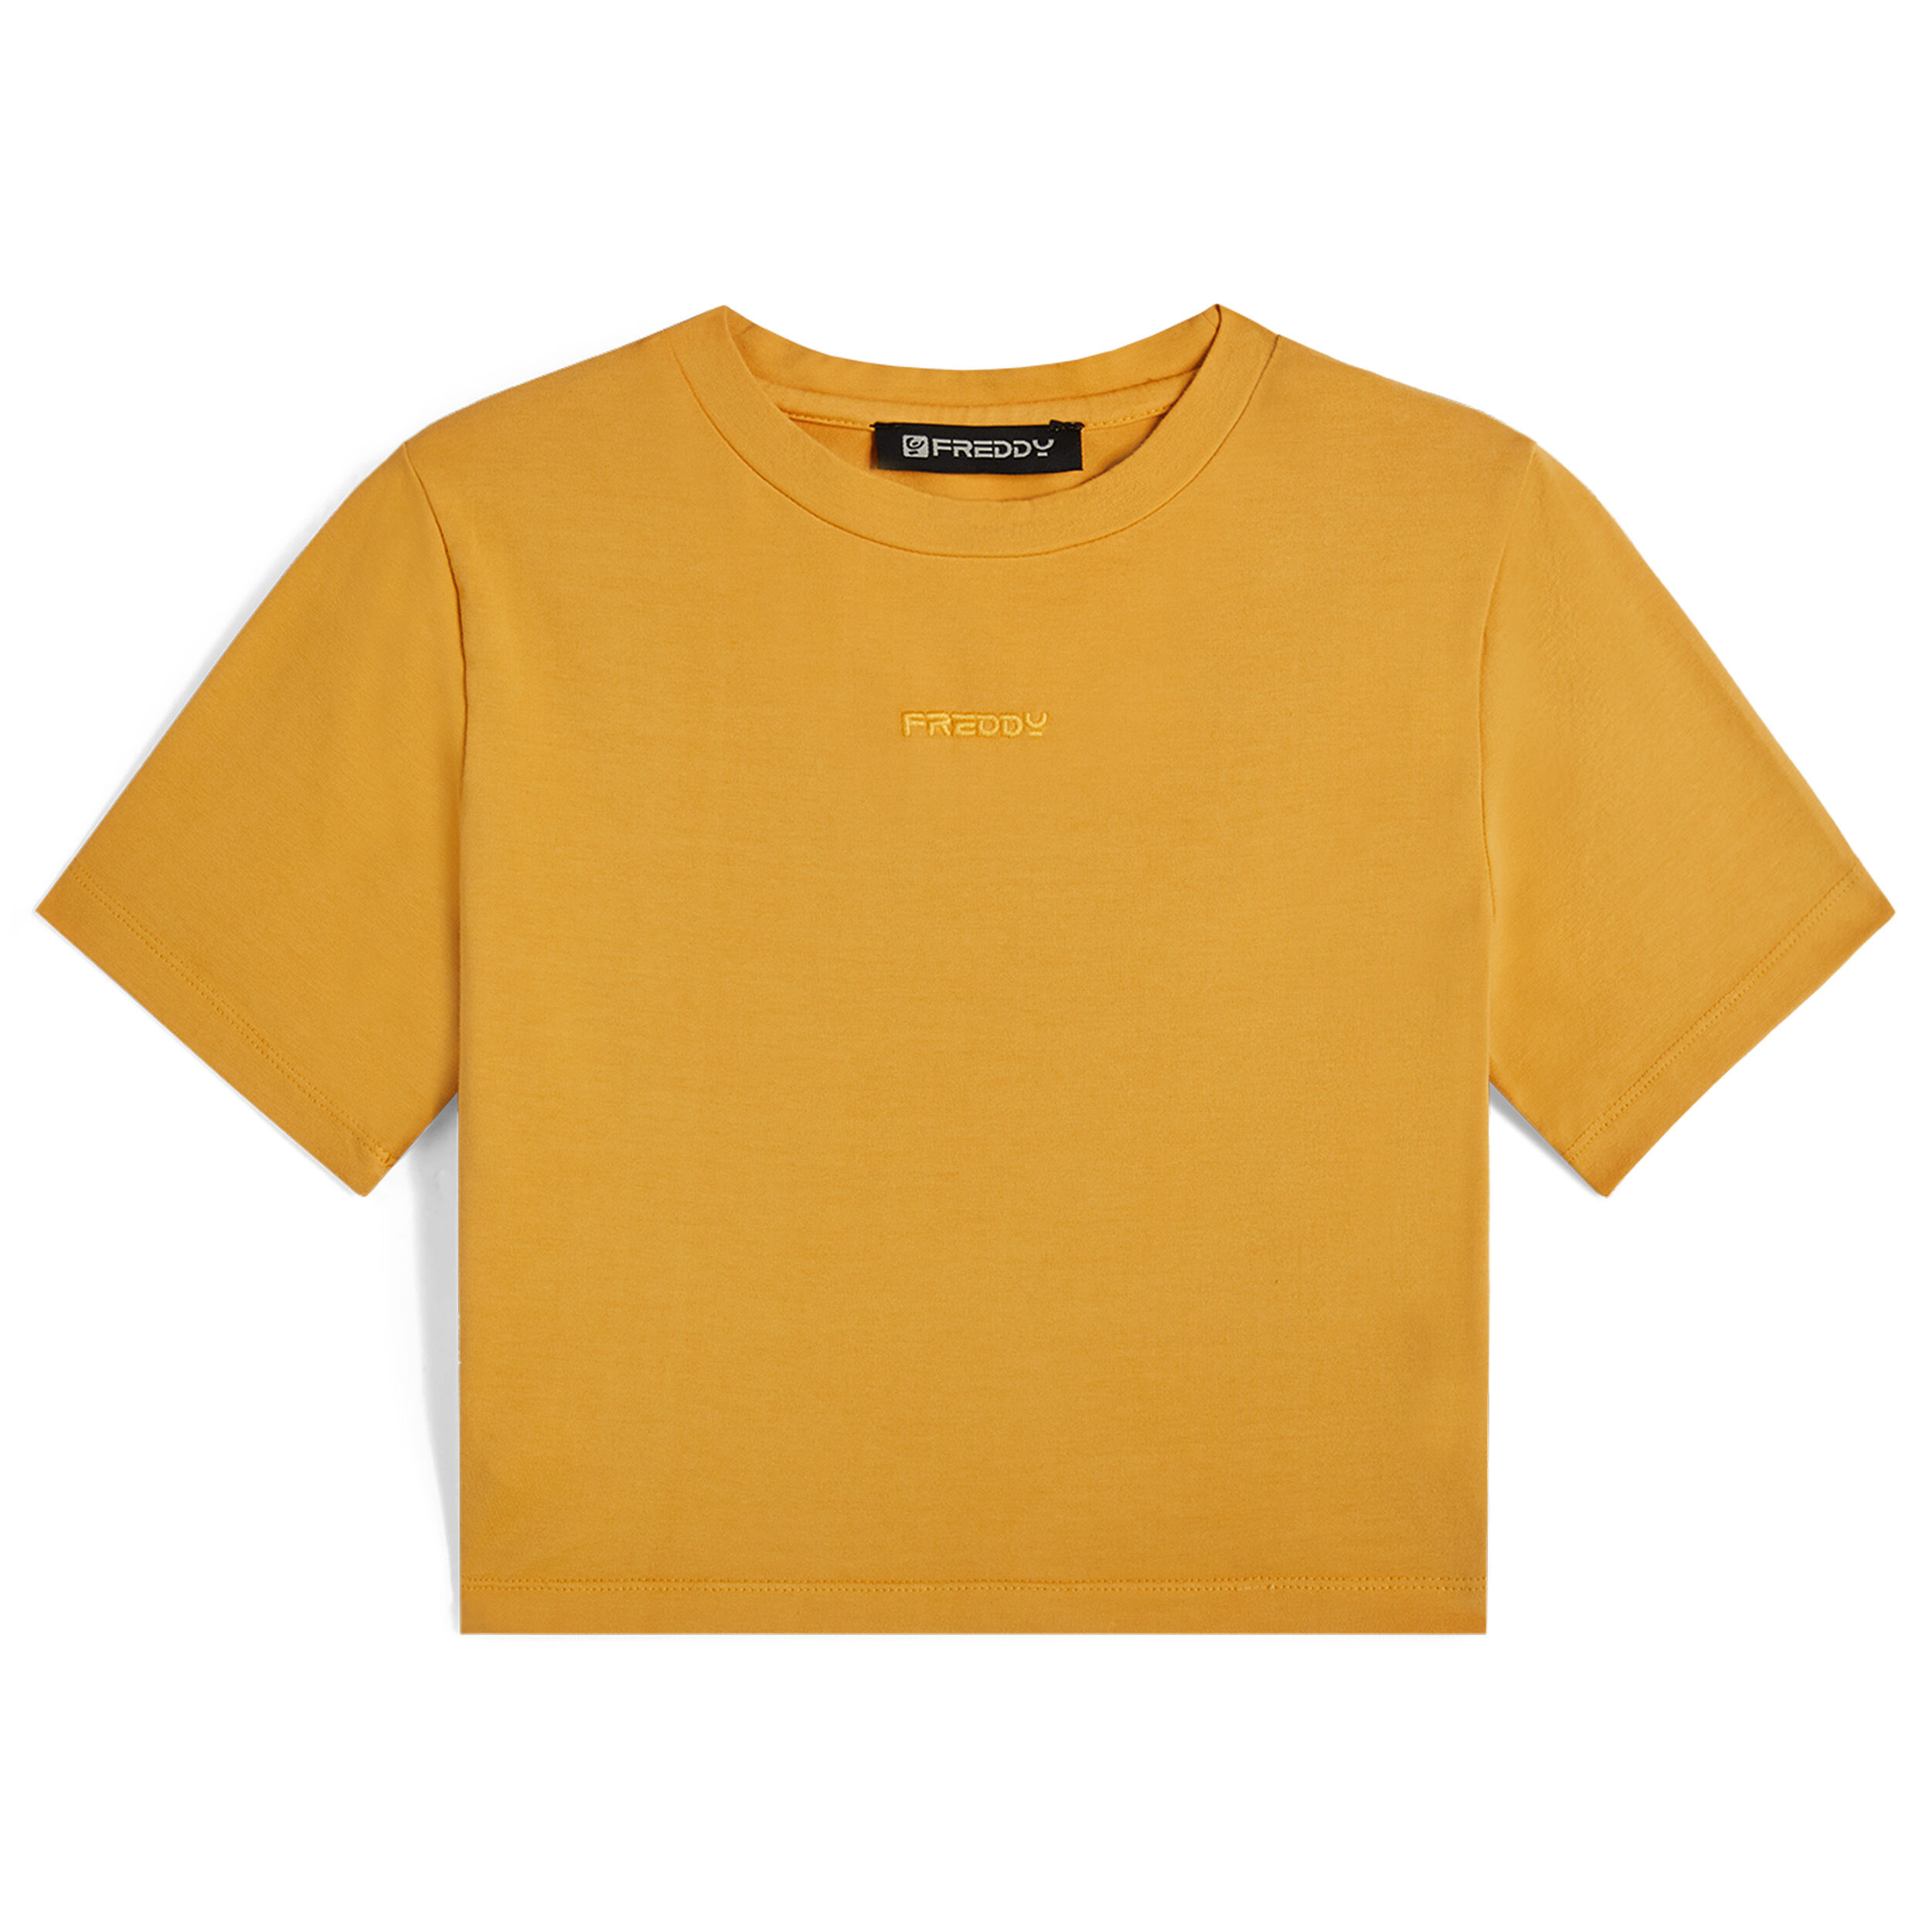 Freddy T-shirt slim fit corta in tessuto jersey tinto capo Golden Apricot Direct Dyed Donna Extra Small